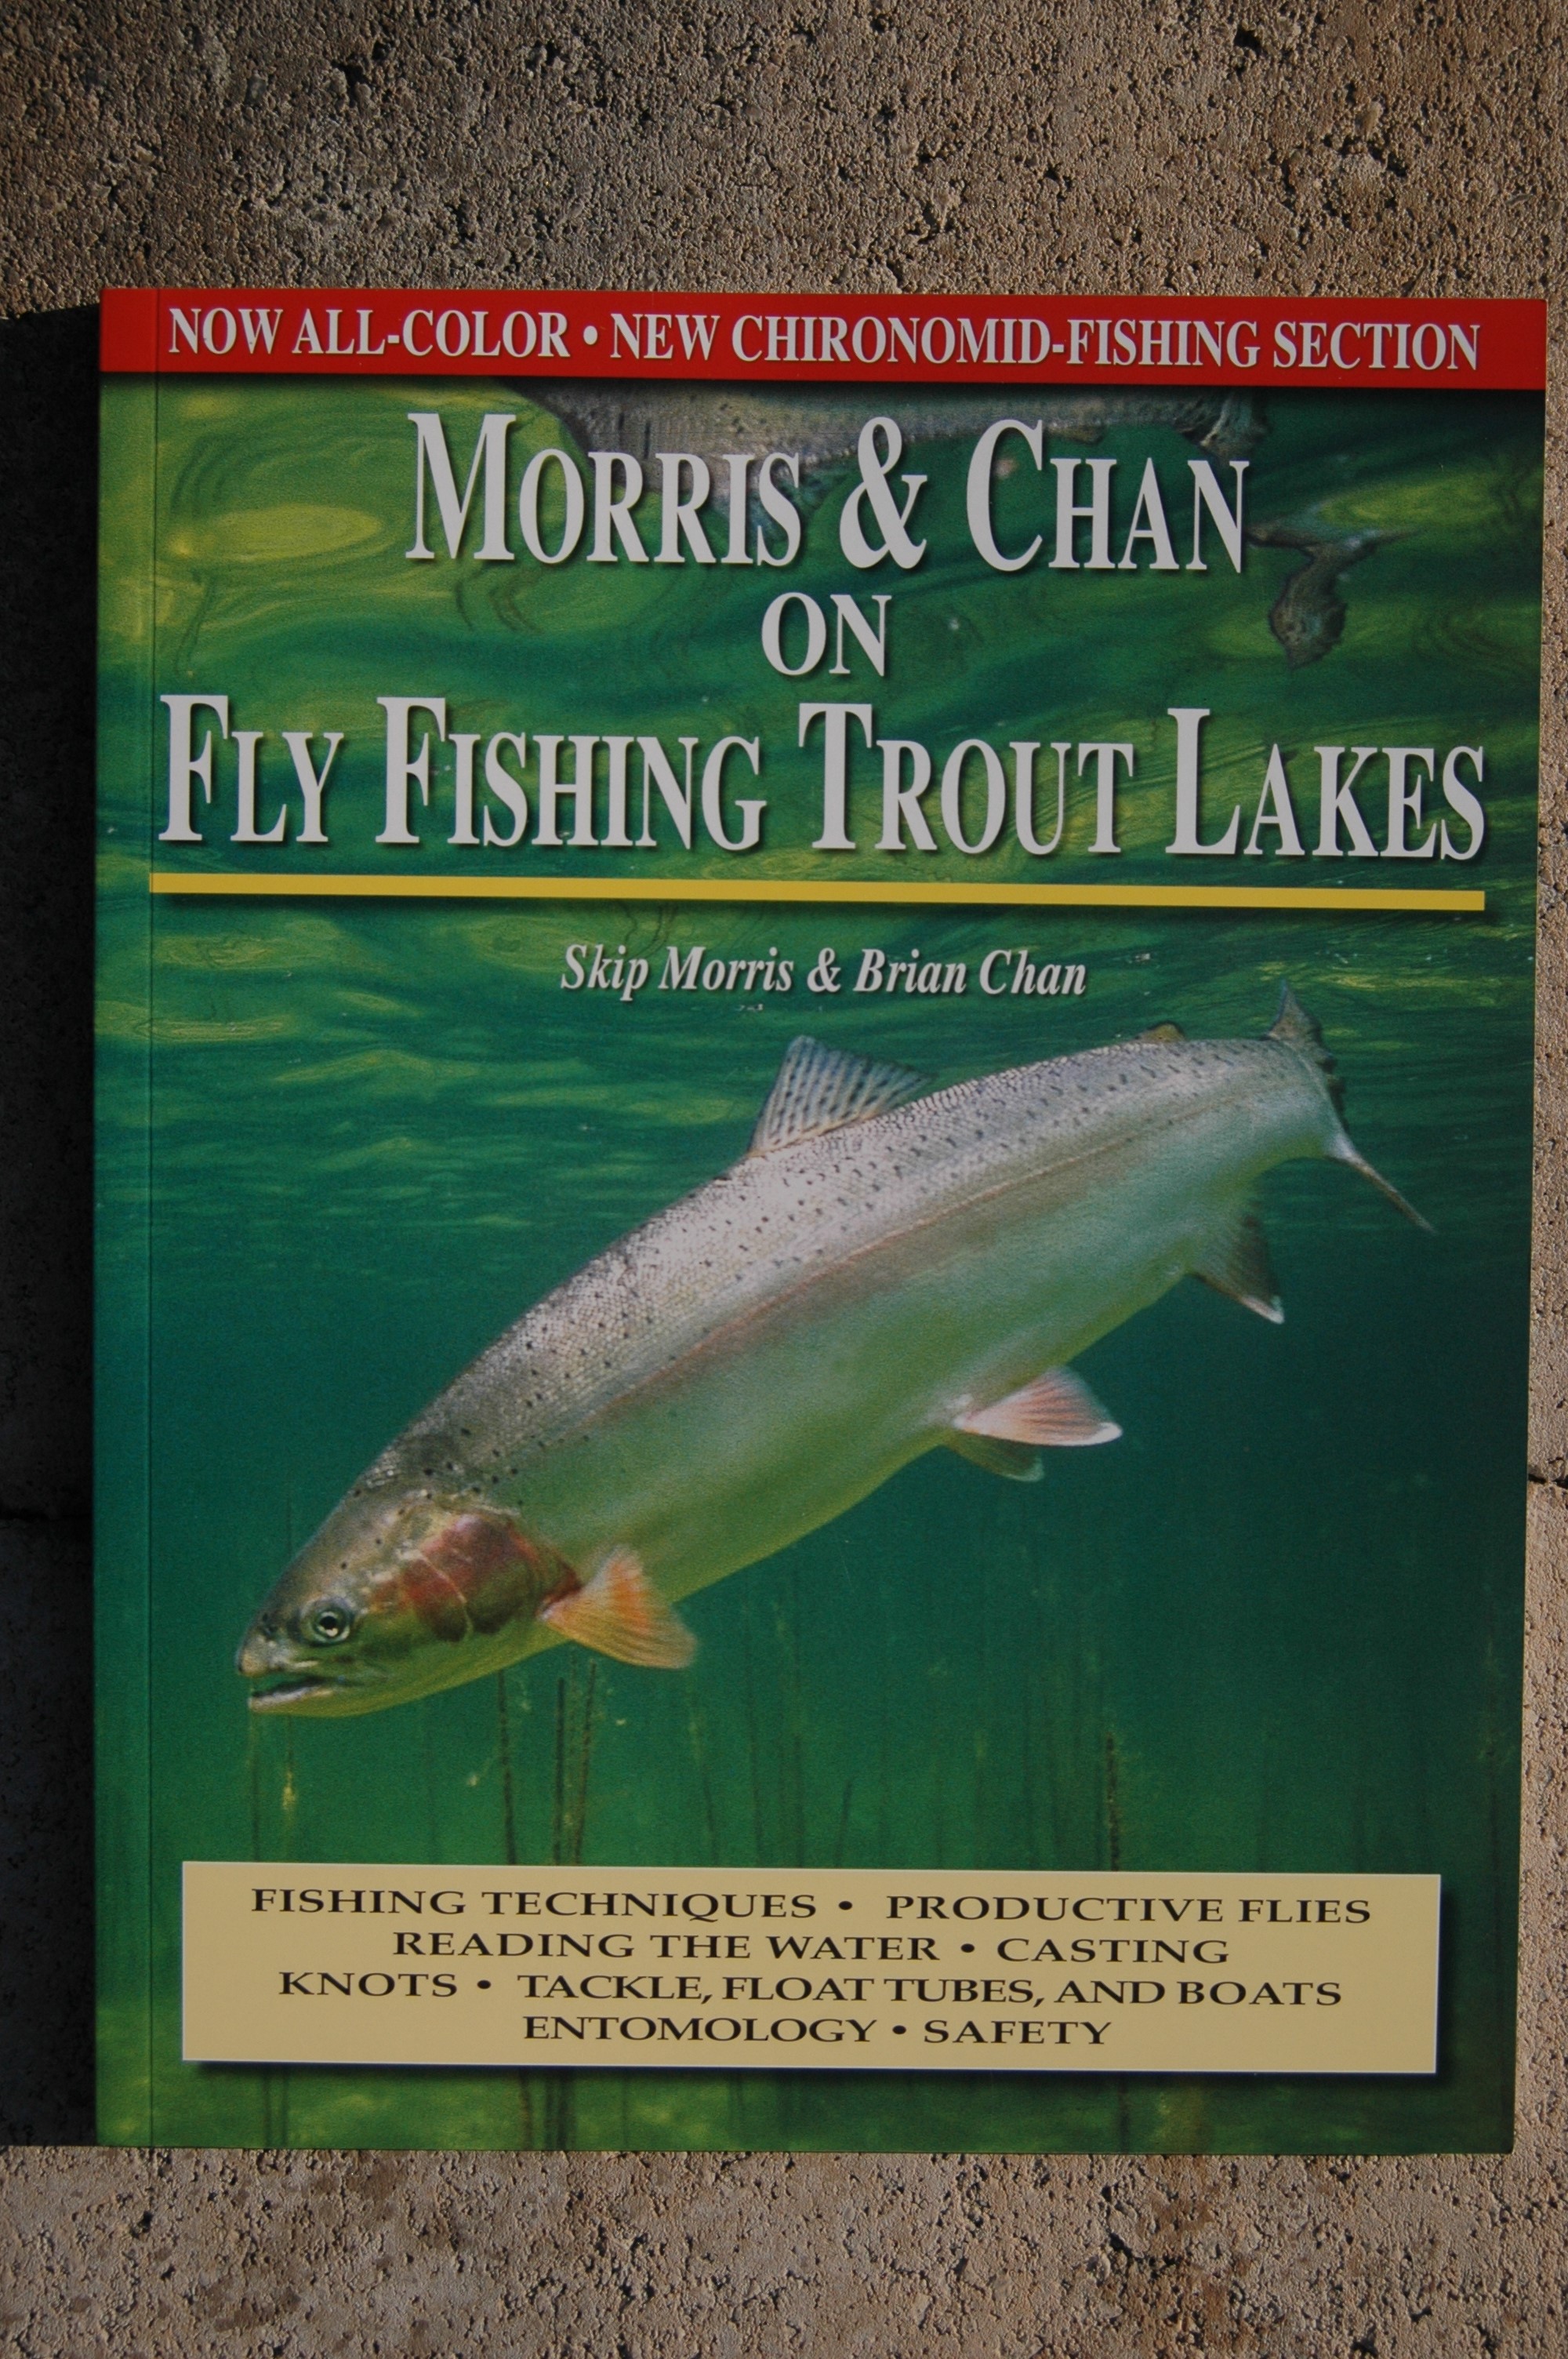 Morris & Chan on Fly Fishing Trout Lakes